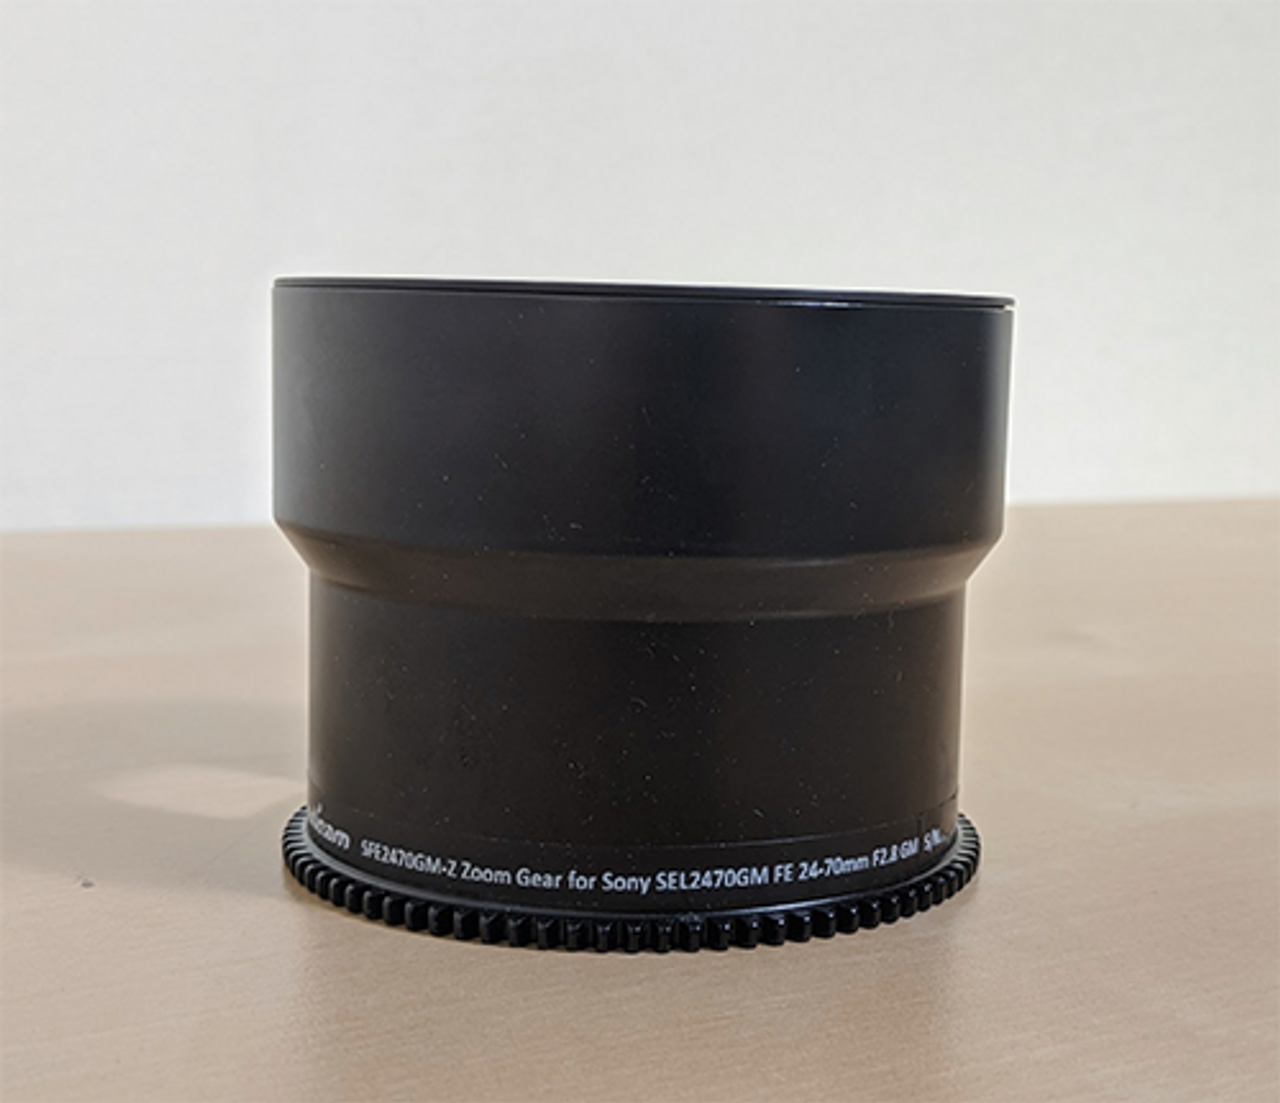 USED: Nauticam Zoom Gear for Sony 24-70mm F2.8 GM Lens (Used Once)